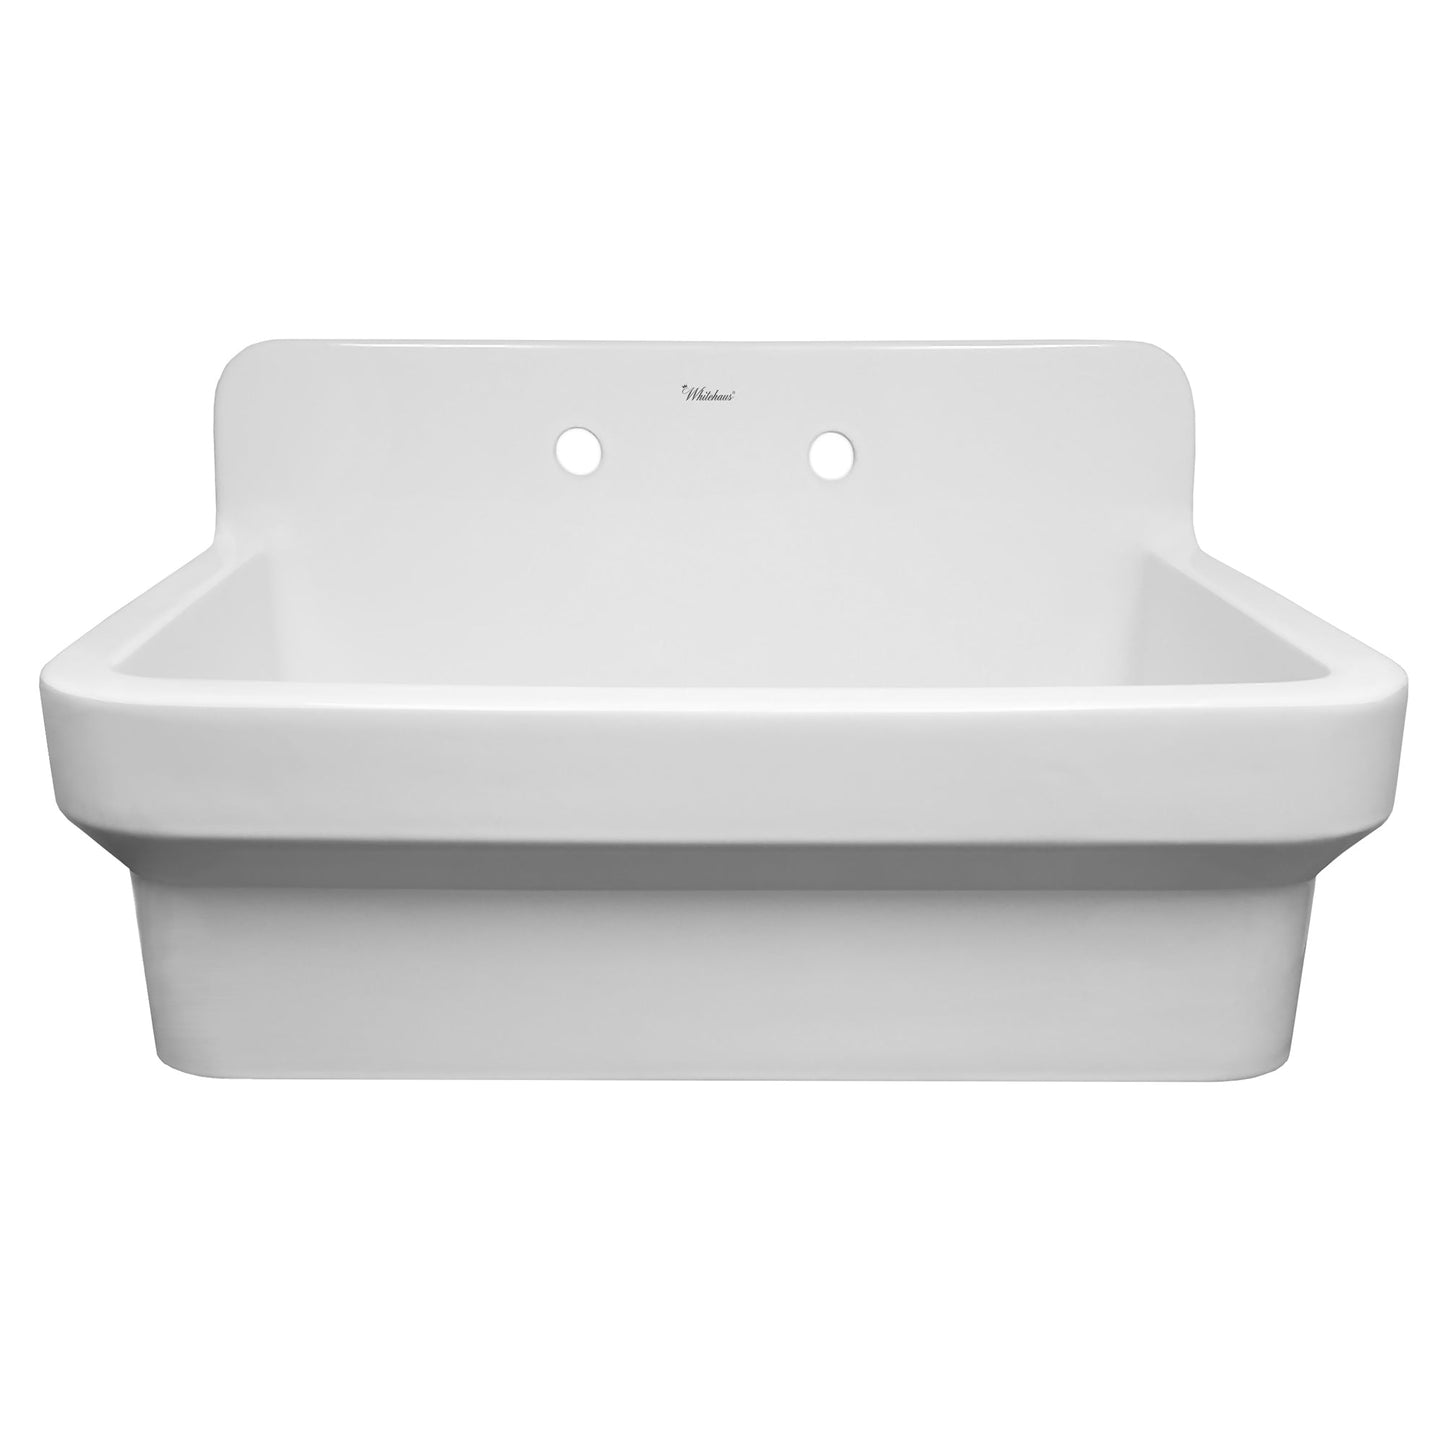 Whitehaus Old Fashioned Country Fireclay Utility Sink with High Backsplash